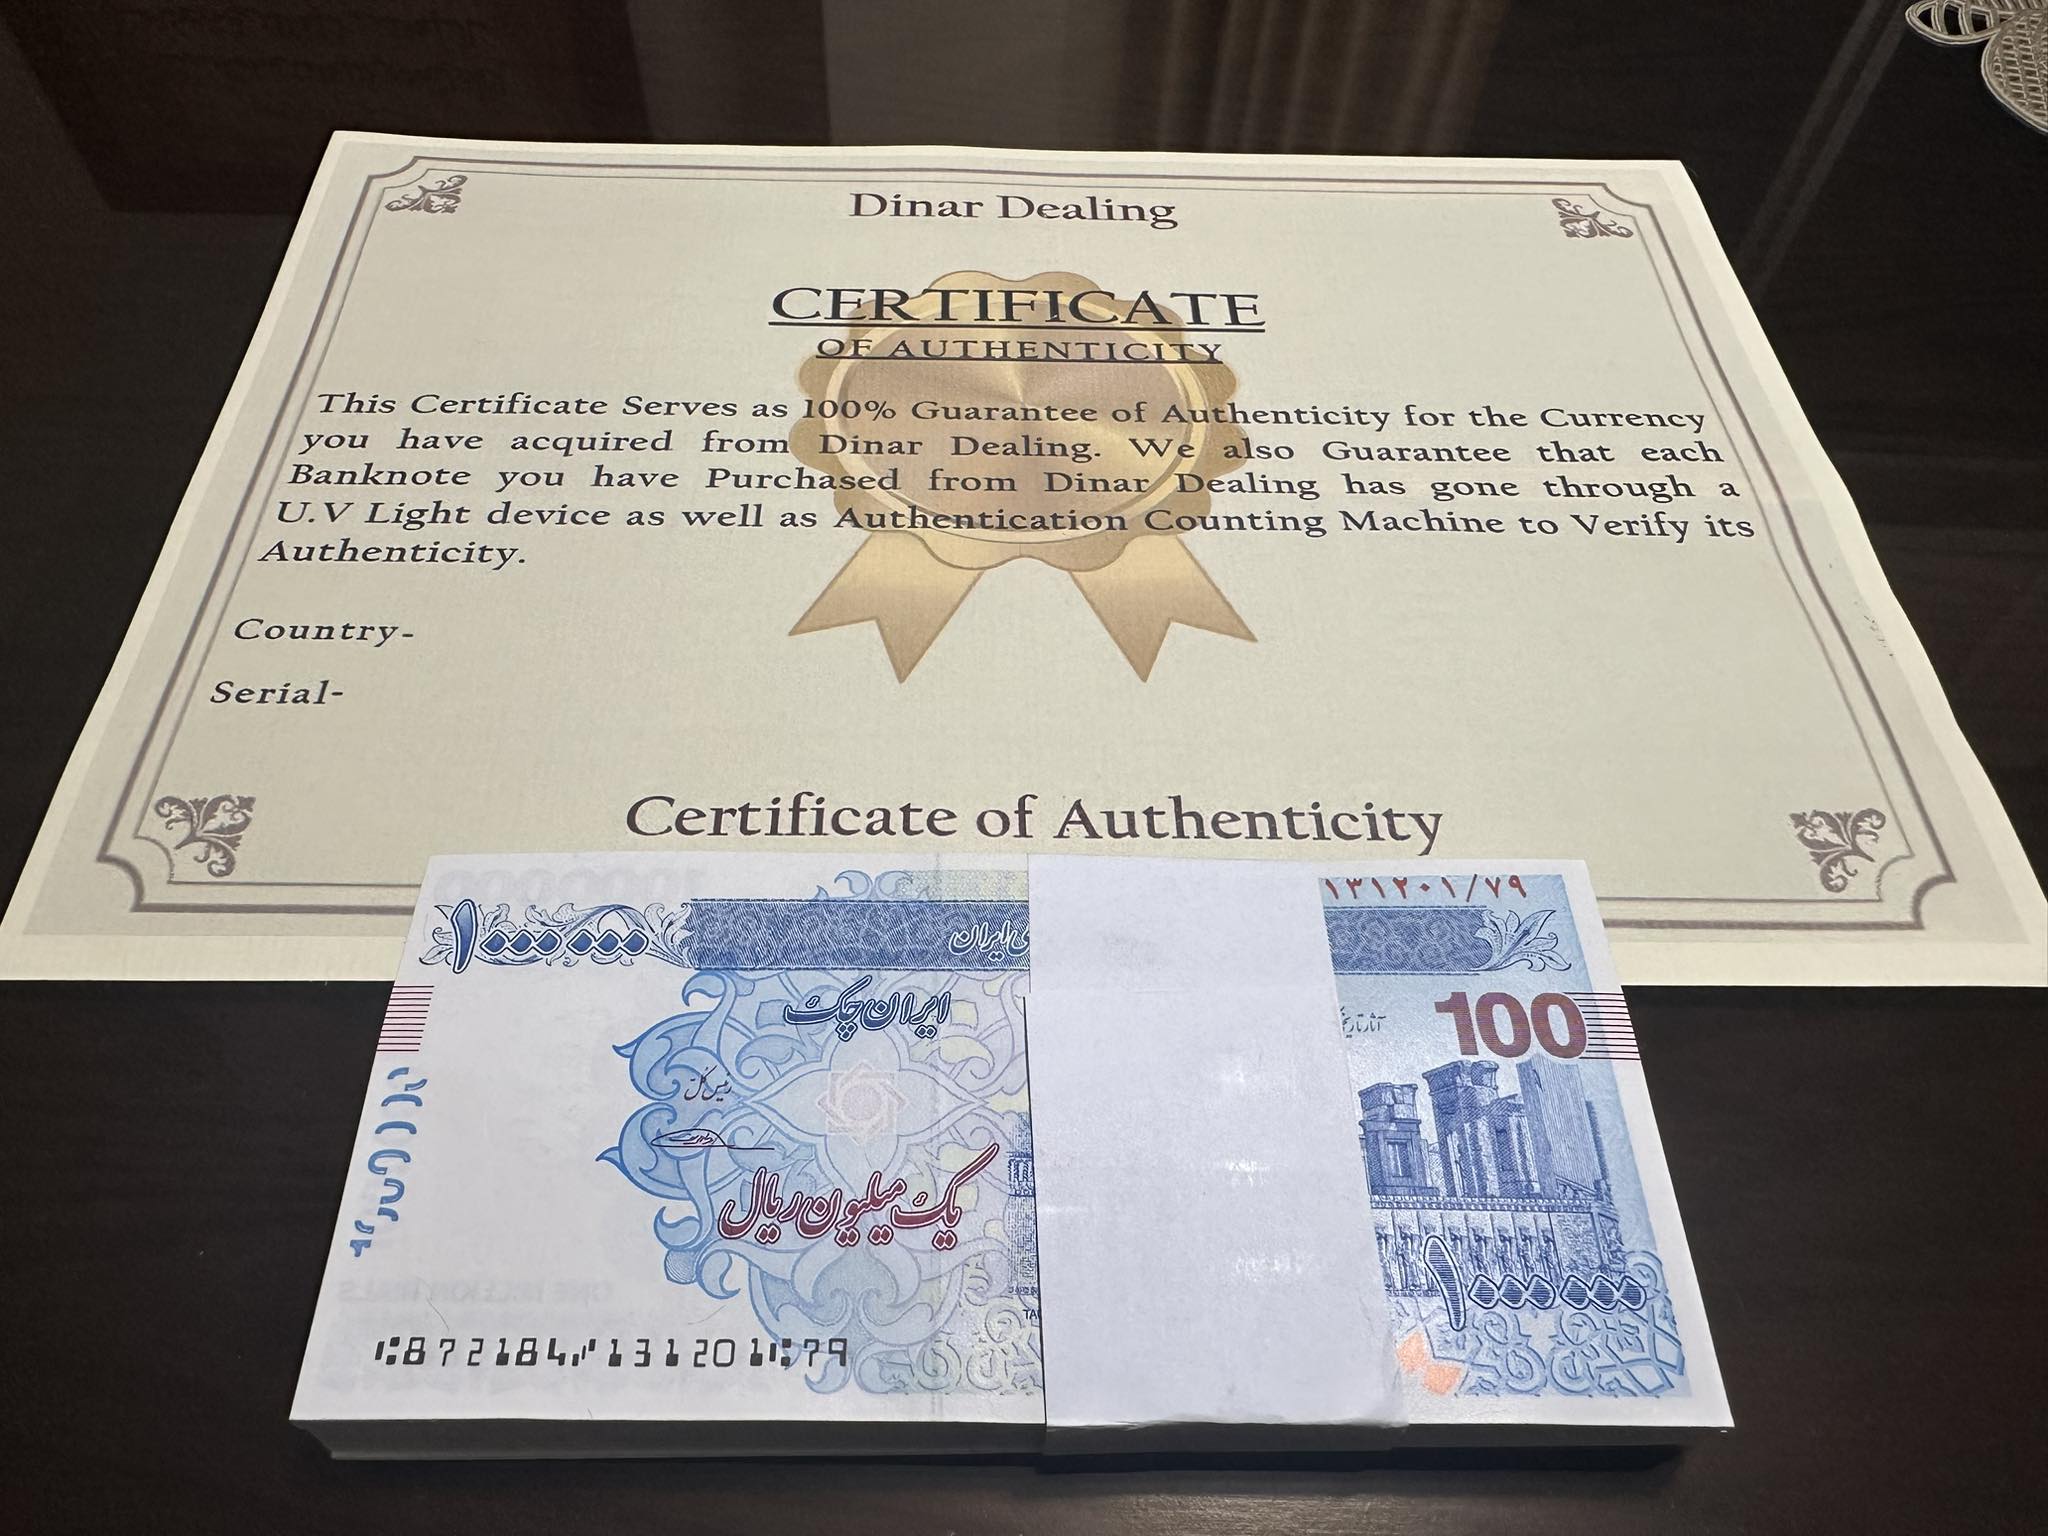 Travel Smart: Buy 3 Sets of 1,000,000 Iranian Rials and Get 3 Free Notes!